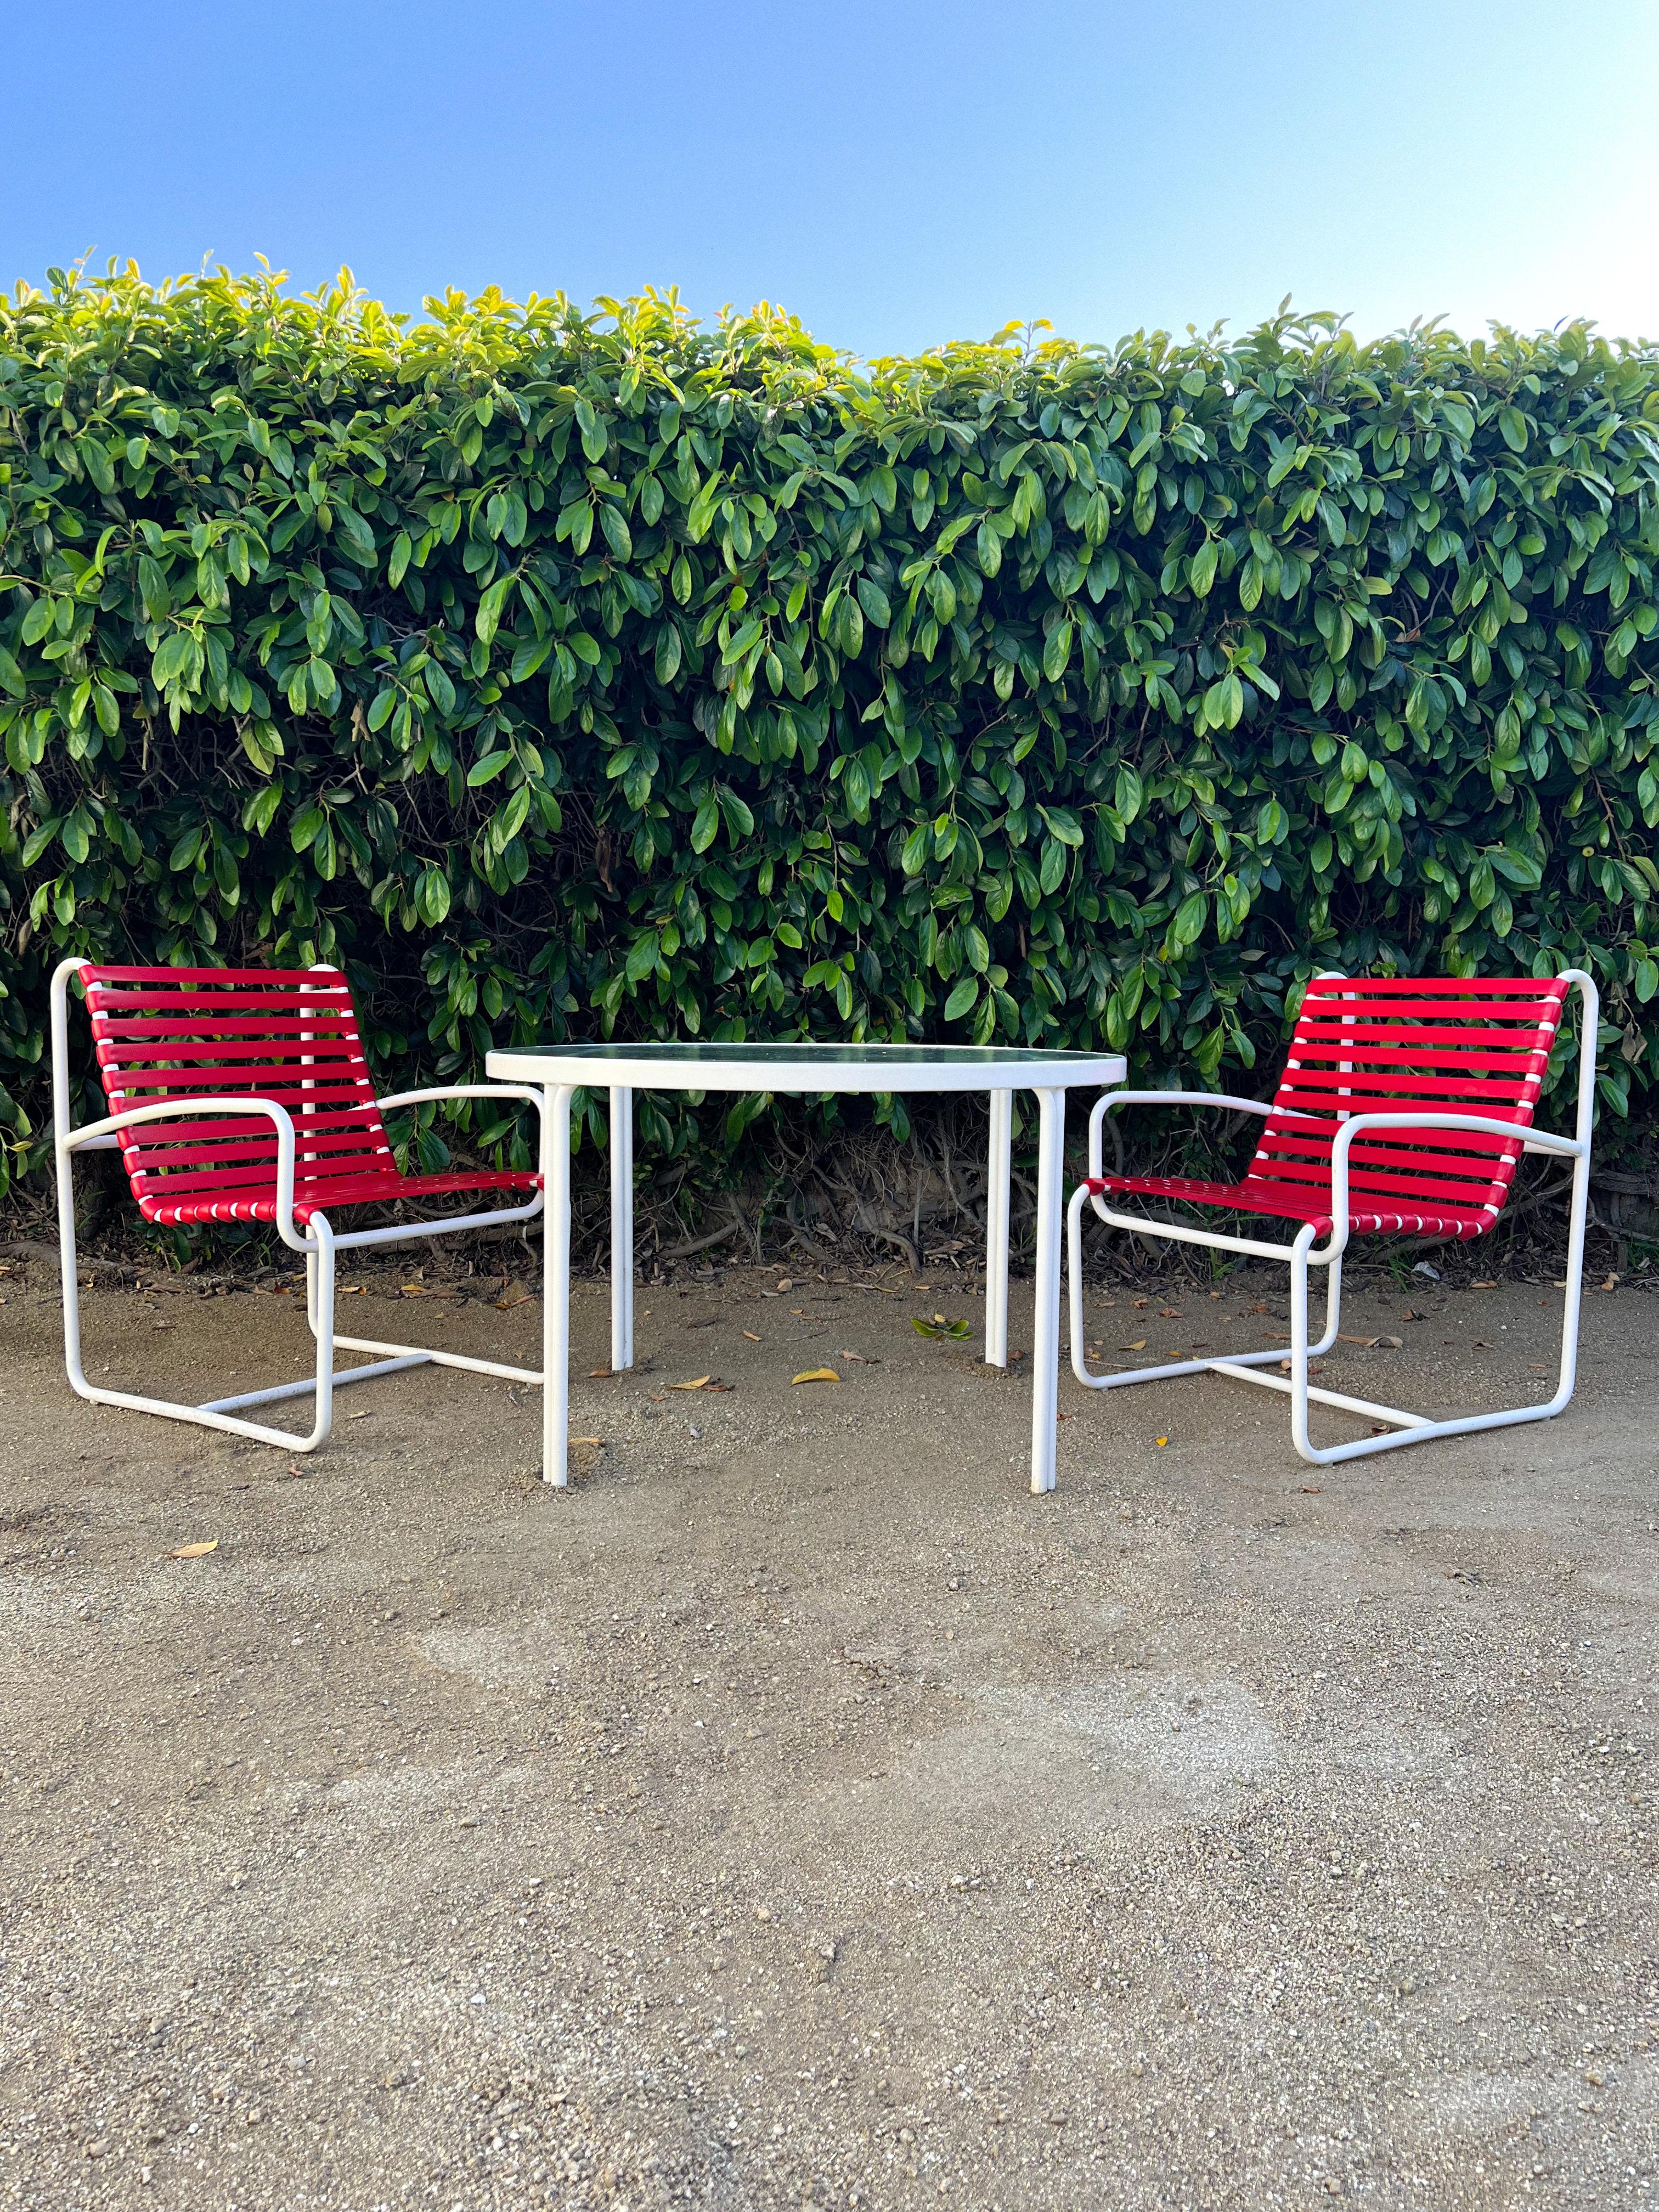 Outdoor 3-piece dining set with 2 chairs and dining table designed in the 1970s by Brown Jordan (unmarked). Original red vinyl straps on metal frames powder coated in white. 

The table features a textured glass in a very mid century style.

Table: